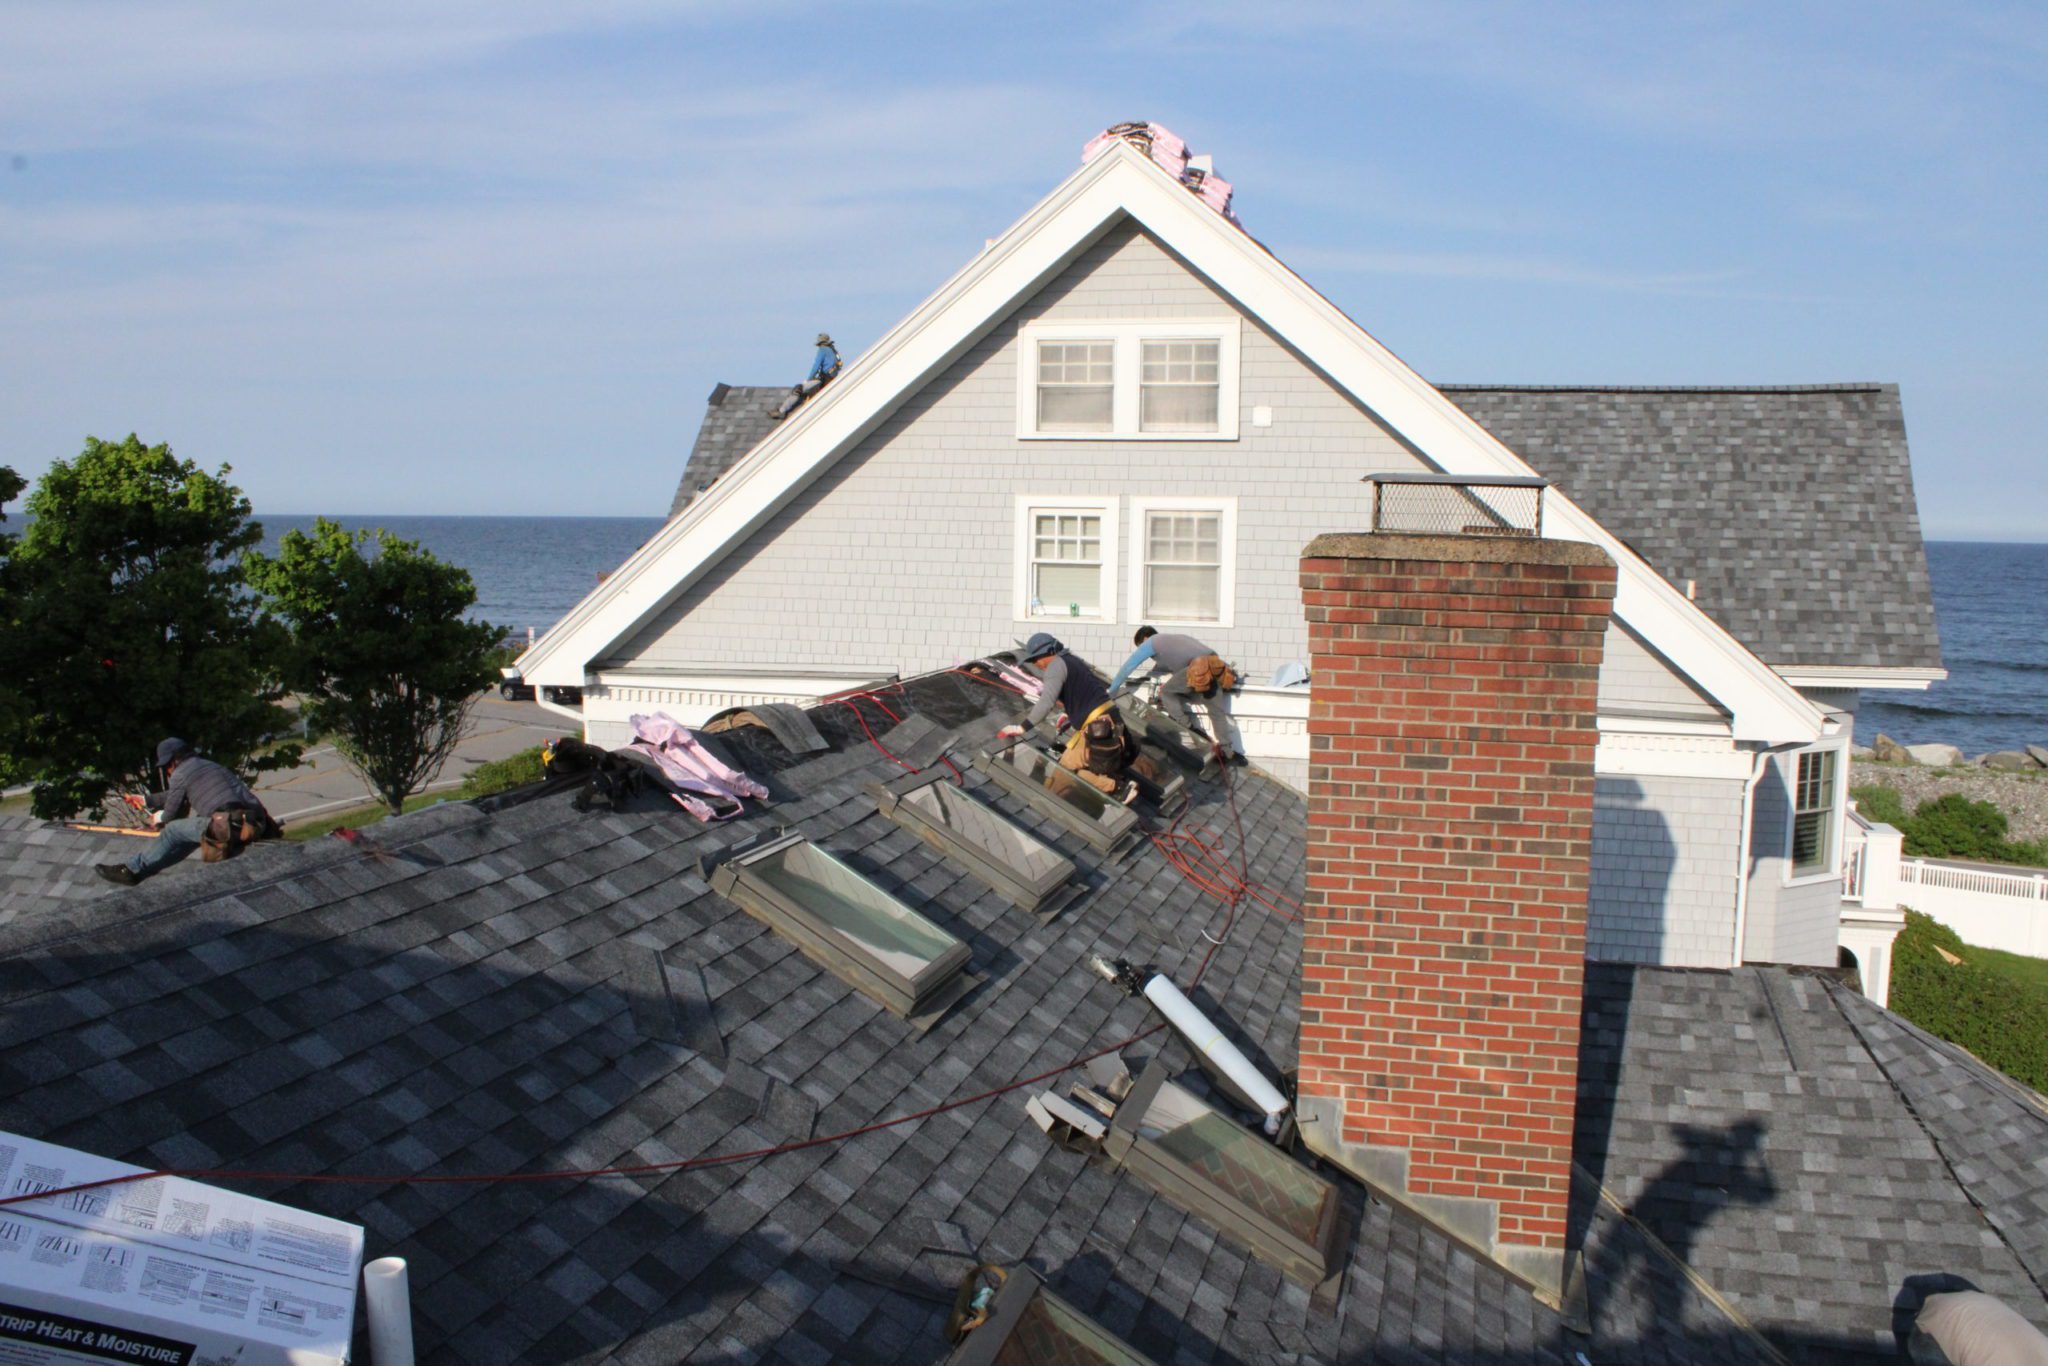 Roofers replacing a shingled roof on a home in Rye, NH.